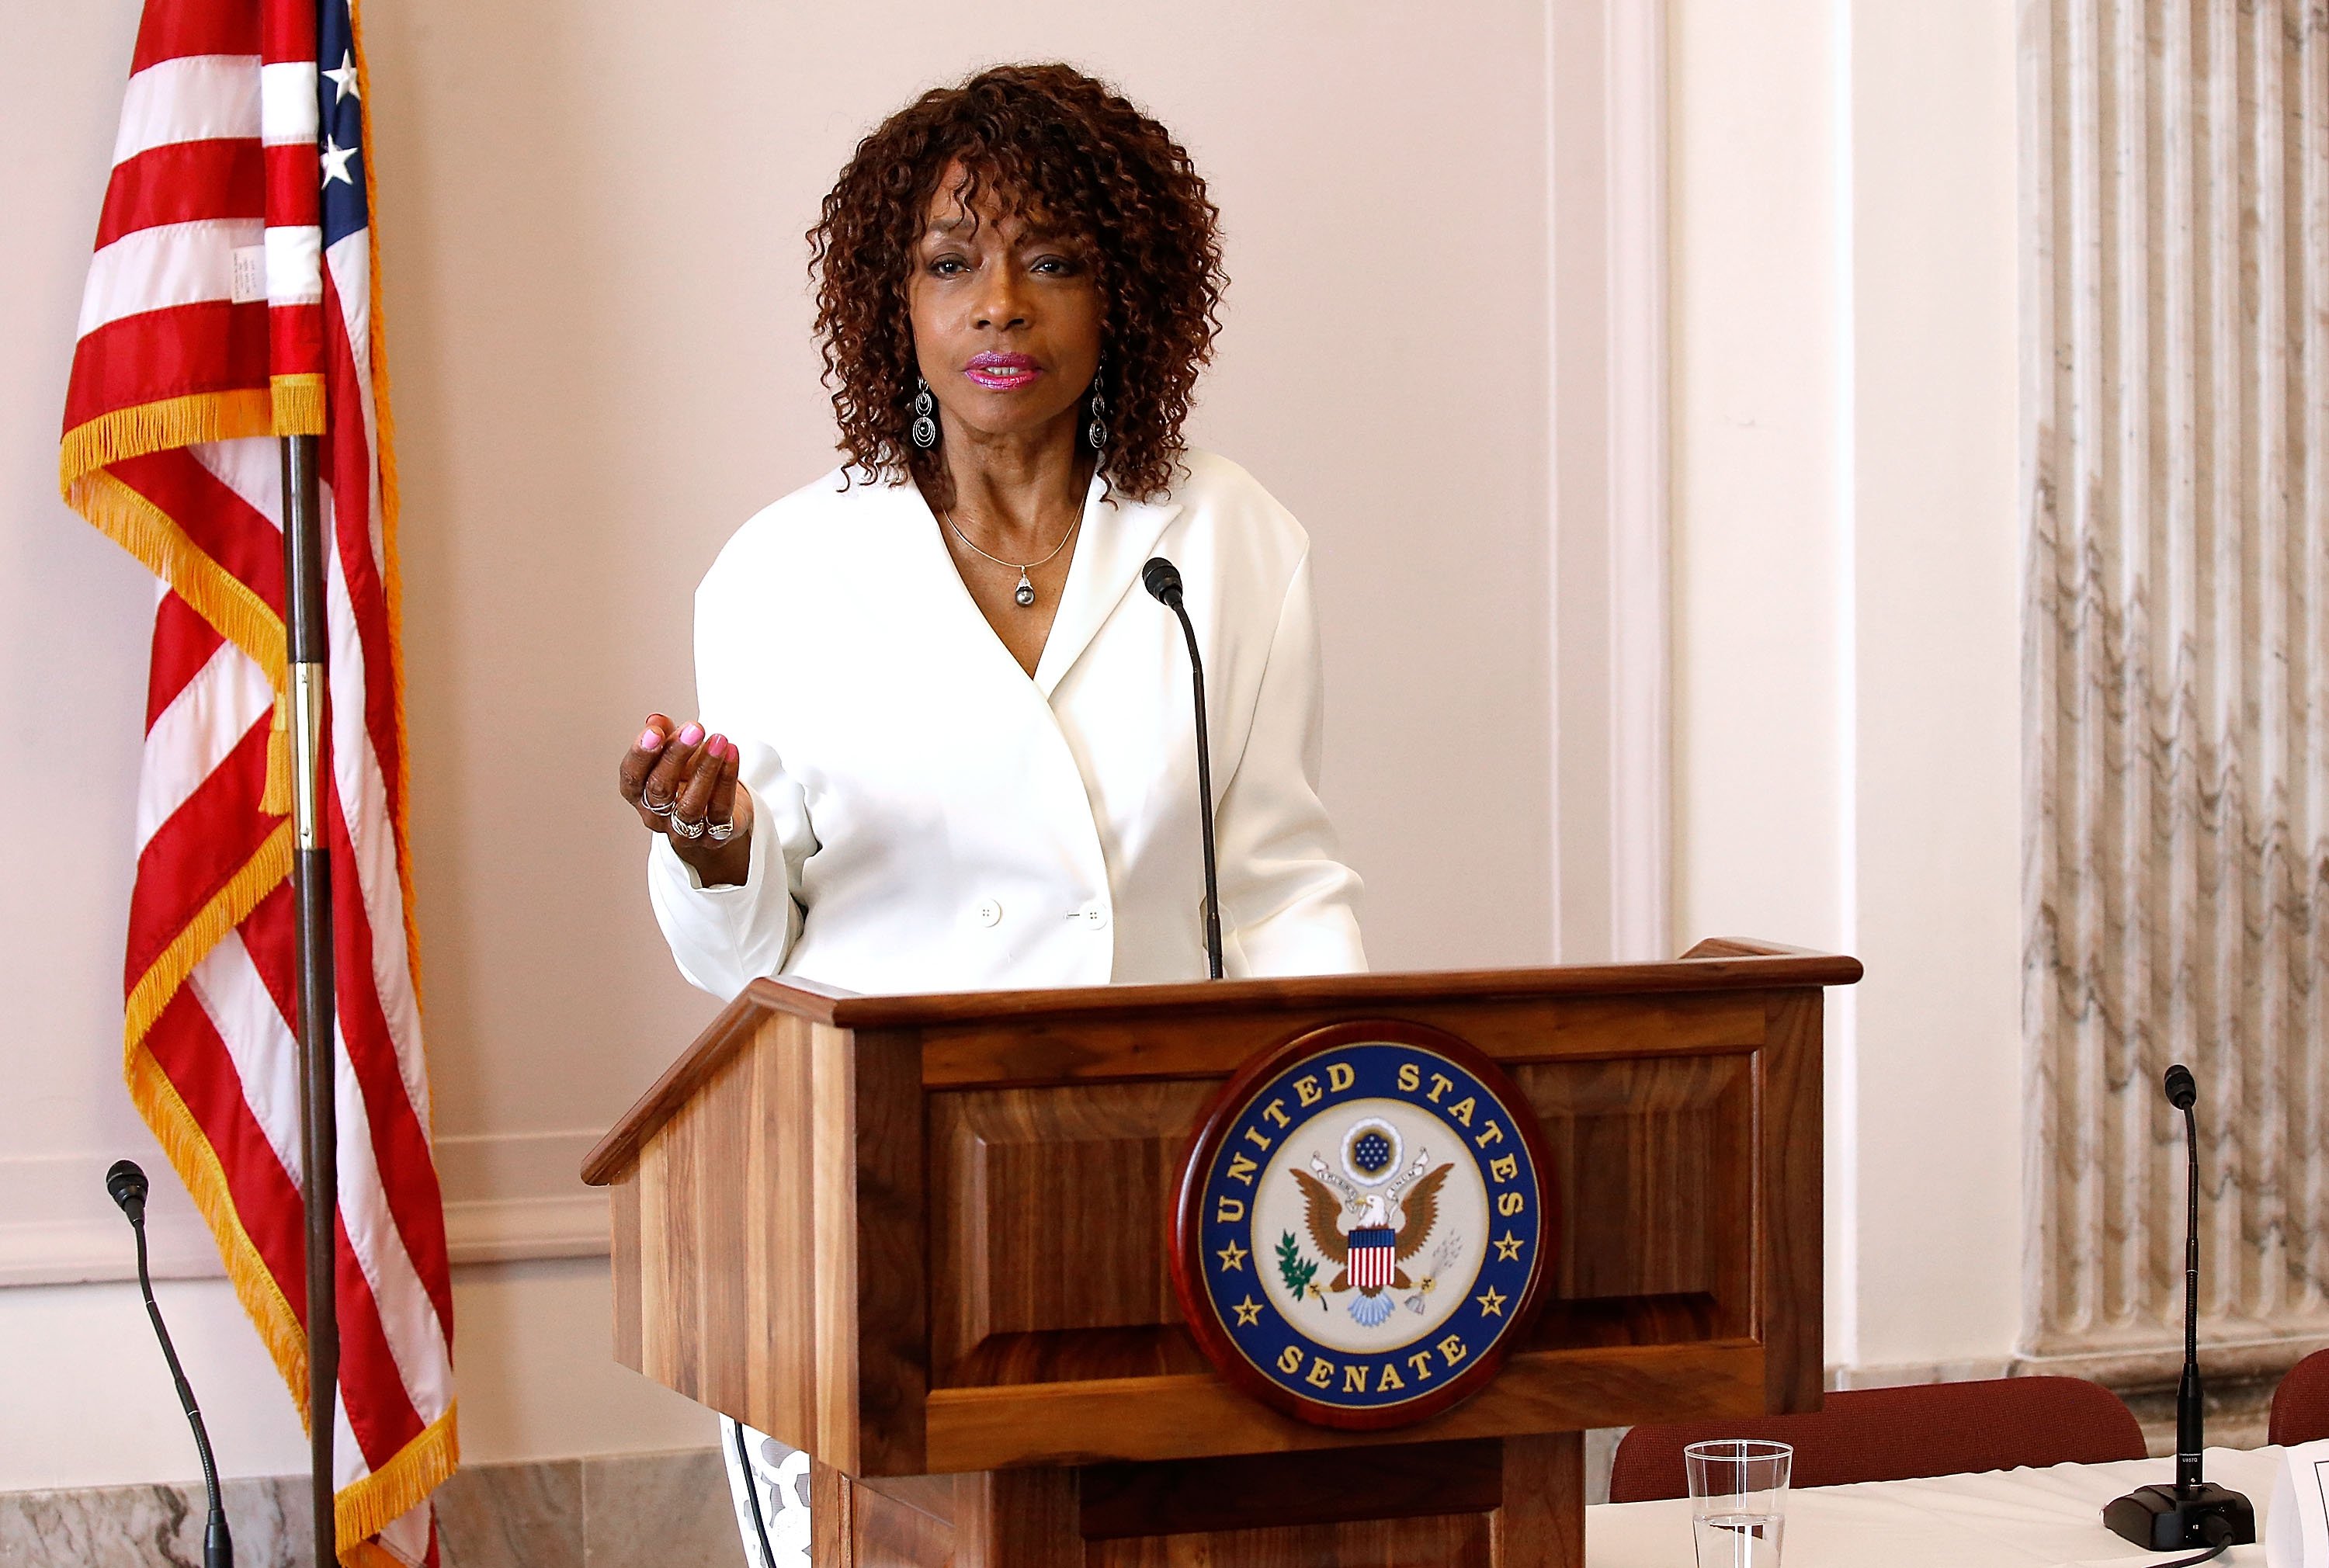  Beverly Todd speaks at the Media Solutions Summit at the Russell Senate Office Building on April 27, 2017. | Photo: GettyImages